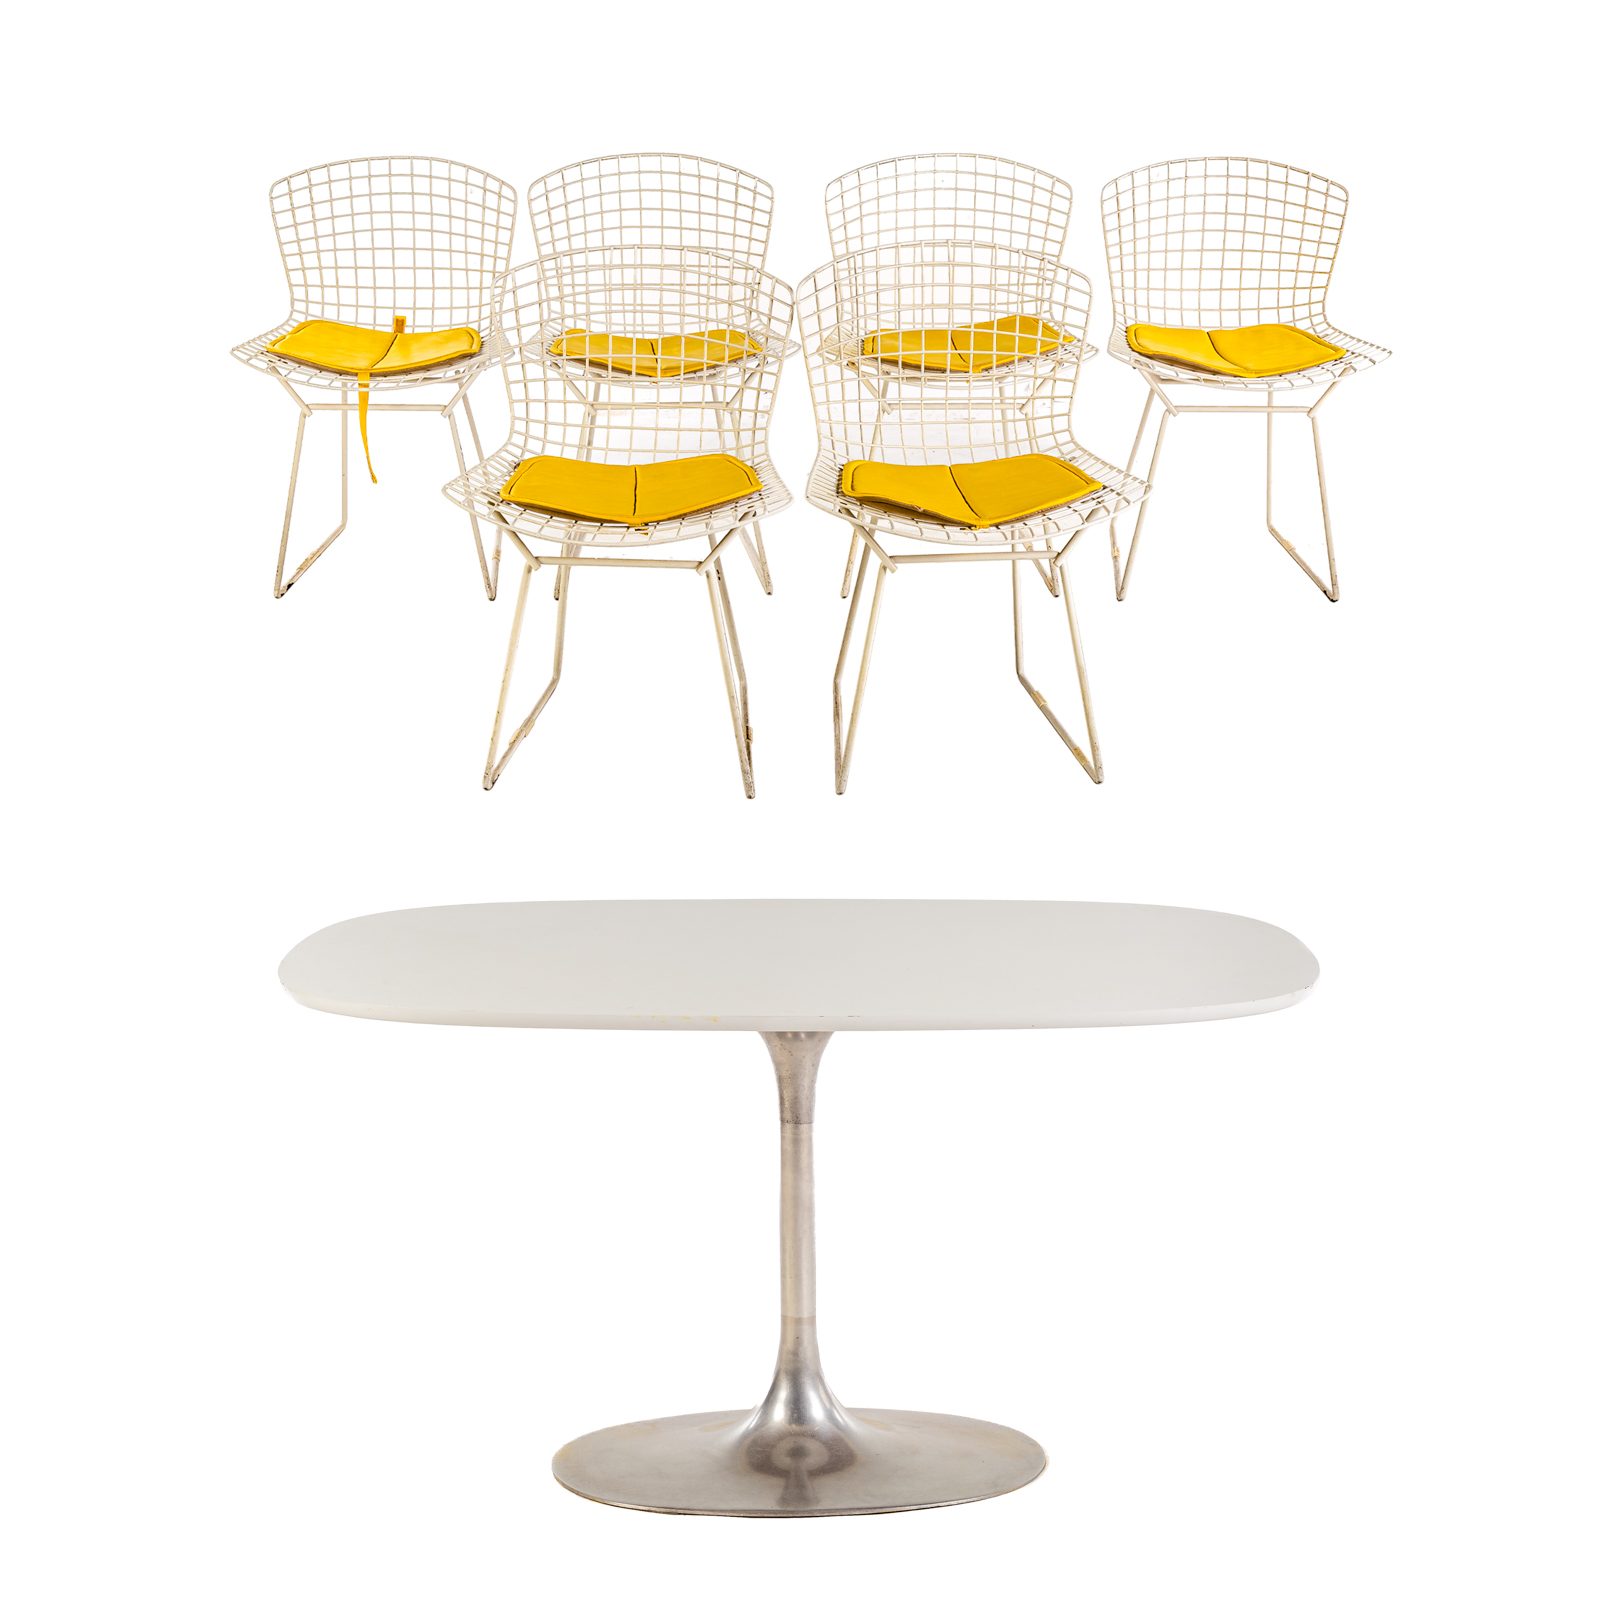 BERTOIA STYLE CHAIRS TULIP TABLE 338780